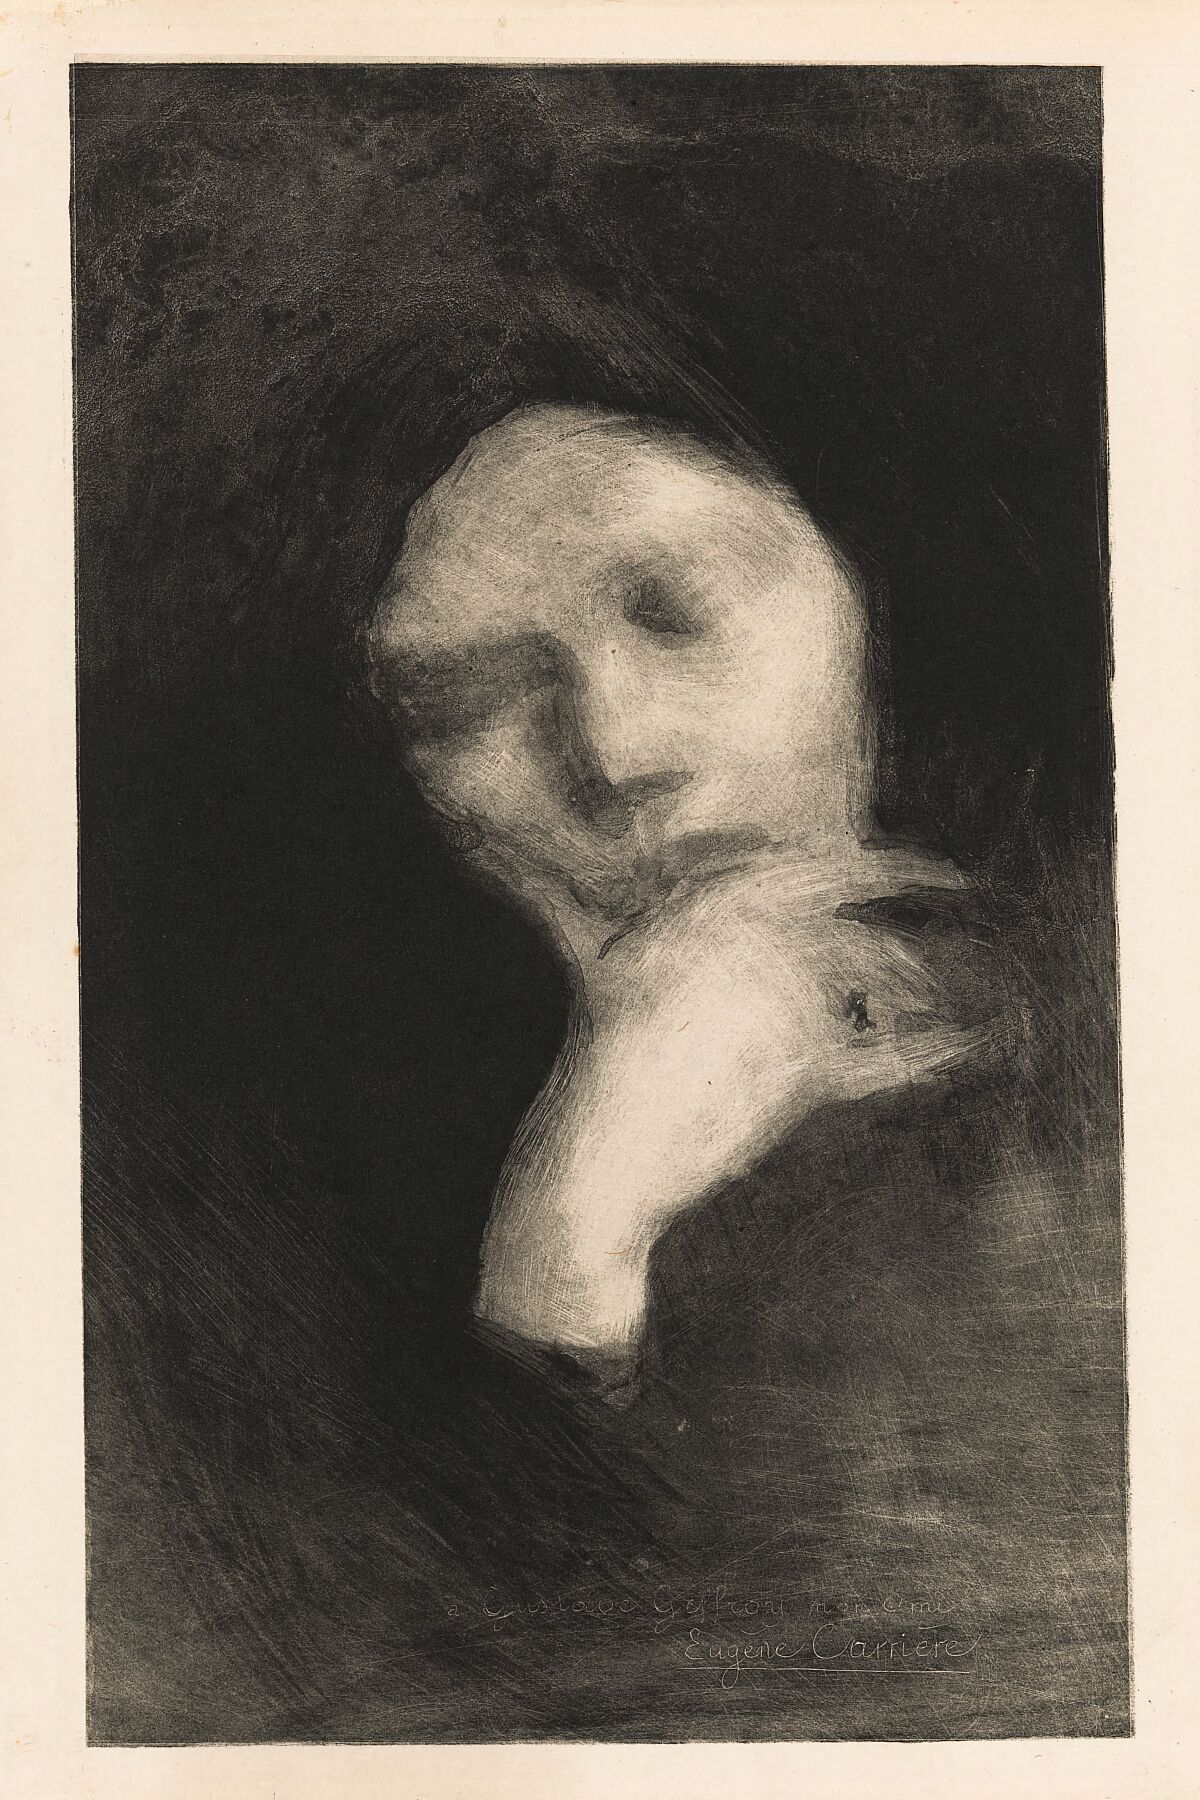 Face of a Meditating Woman by Eugène Carrière - c. 1893-4